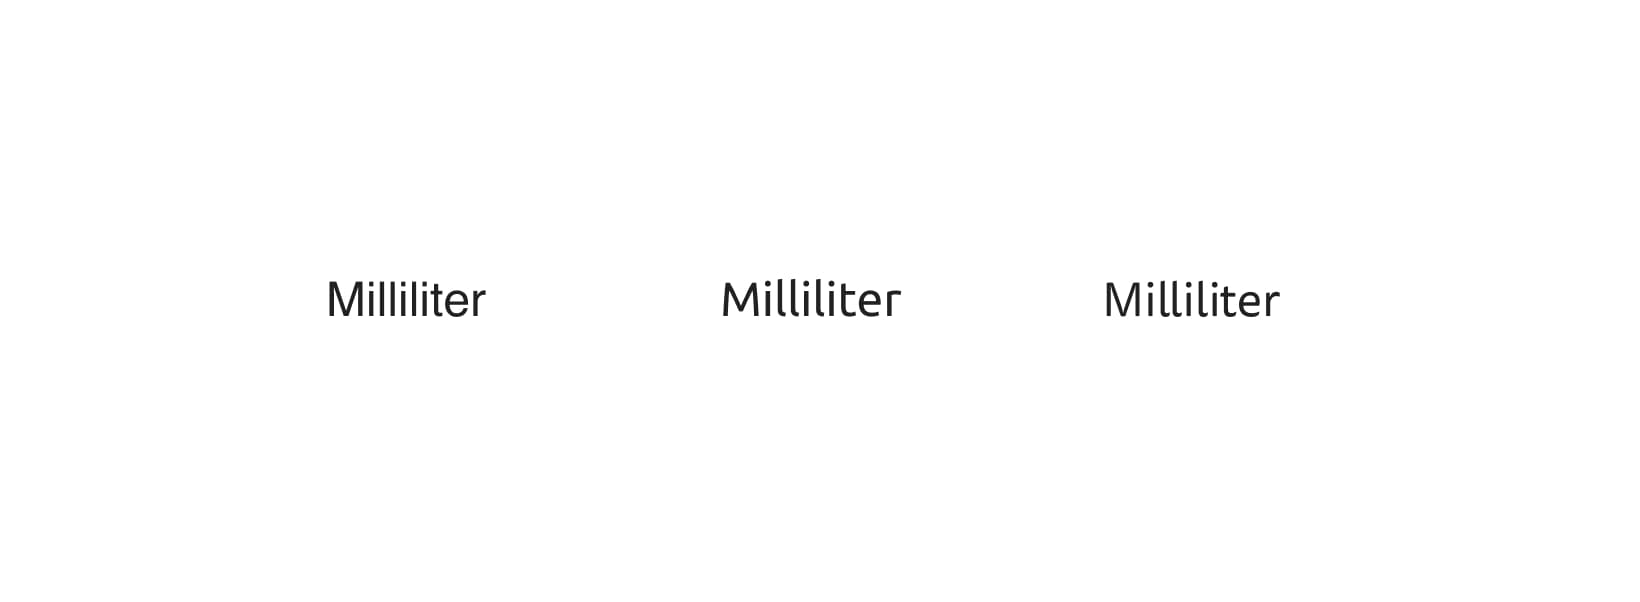 <strong>FIG 6</strong>: Left to right, word “Milliliter” in Helvetica, Ubuntu and Tisa Sans Pro. I intentionally left the font sizes in this example relatively small so that you can notice the difference in legibility.